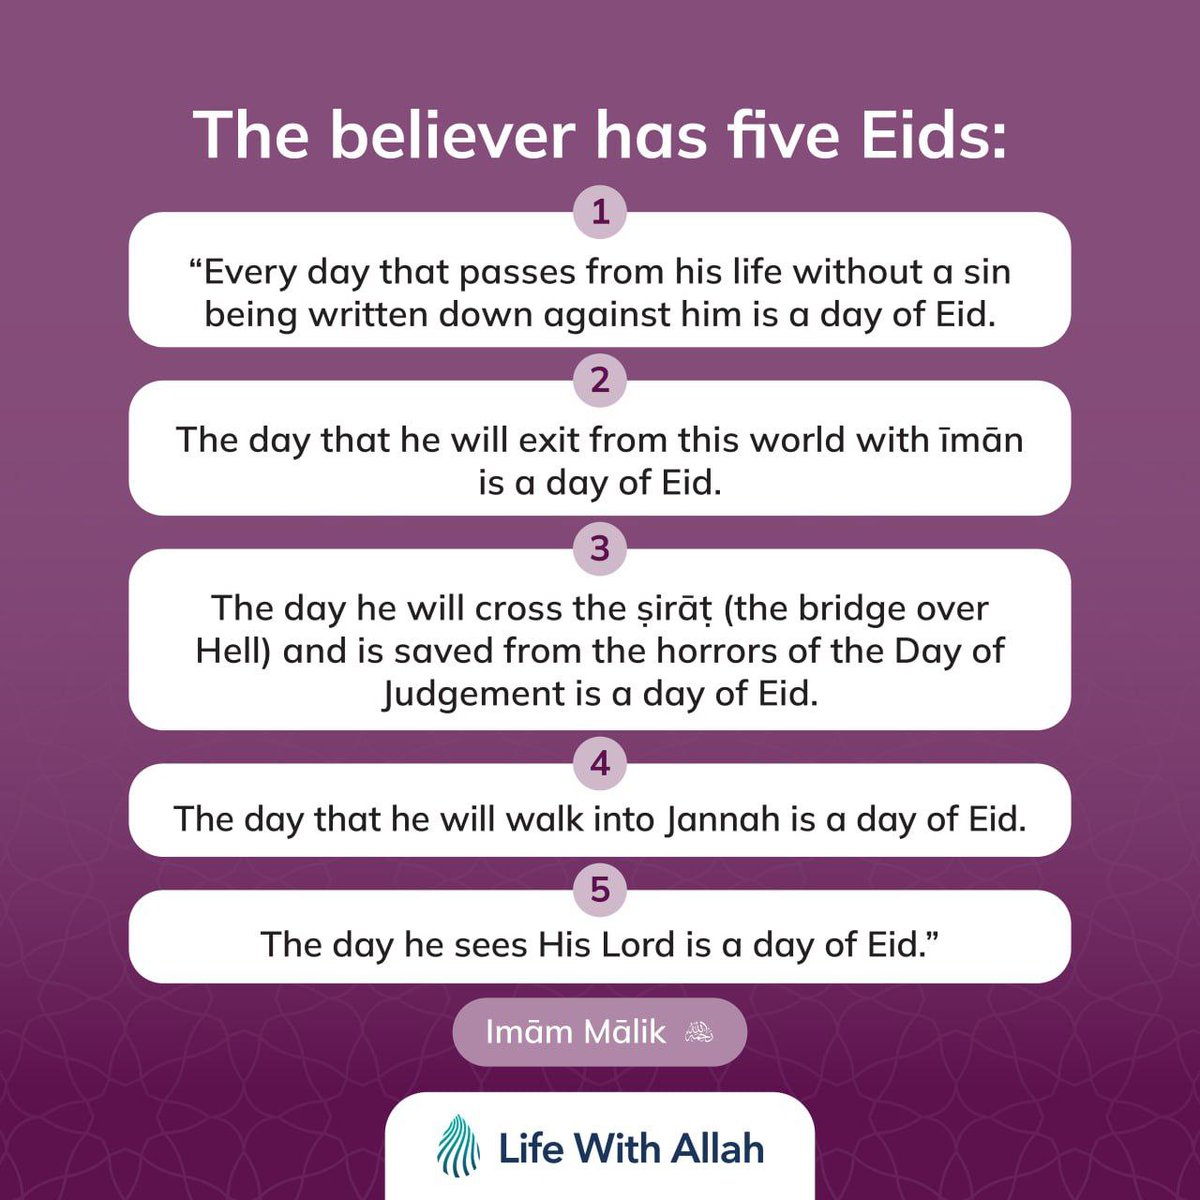 “The believer has five Eids: 1. Every day that passes from his life without a sin being written down against him is a day of Eid. 2. The day that he will exit from this world with īmān is a day of Eid.